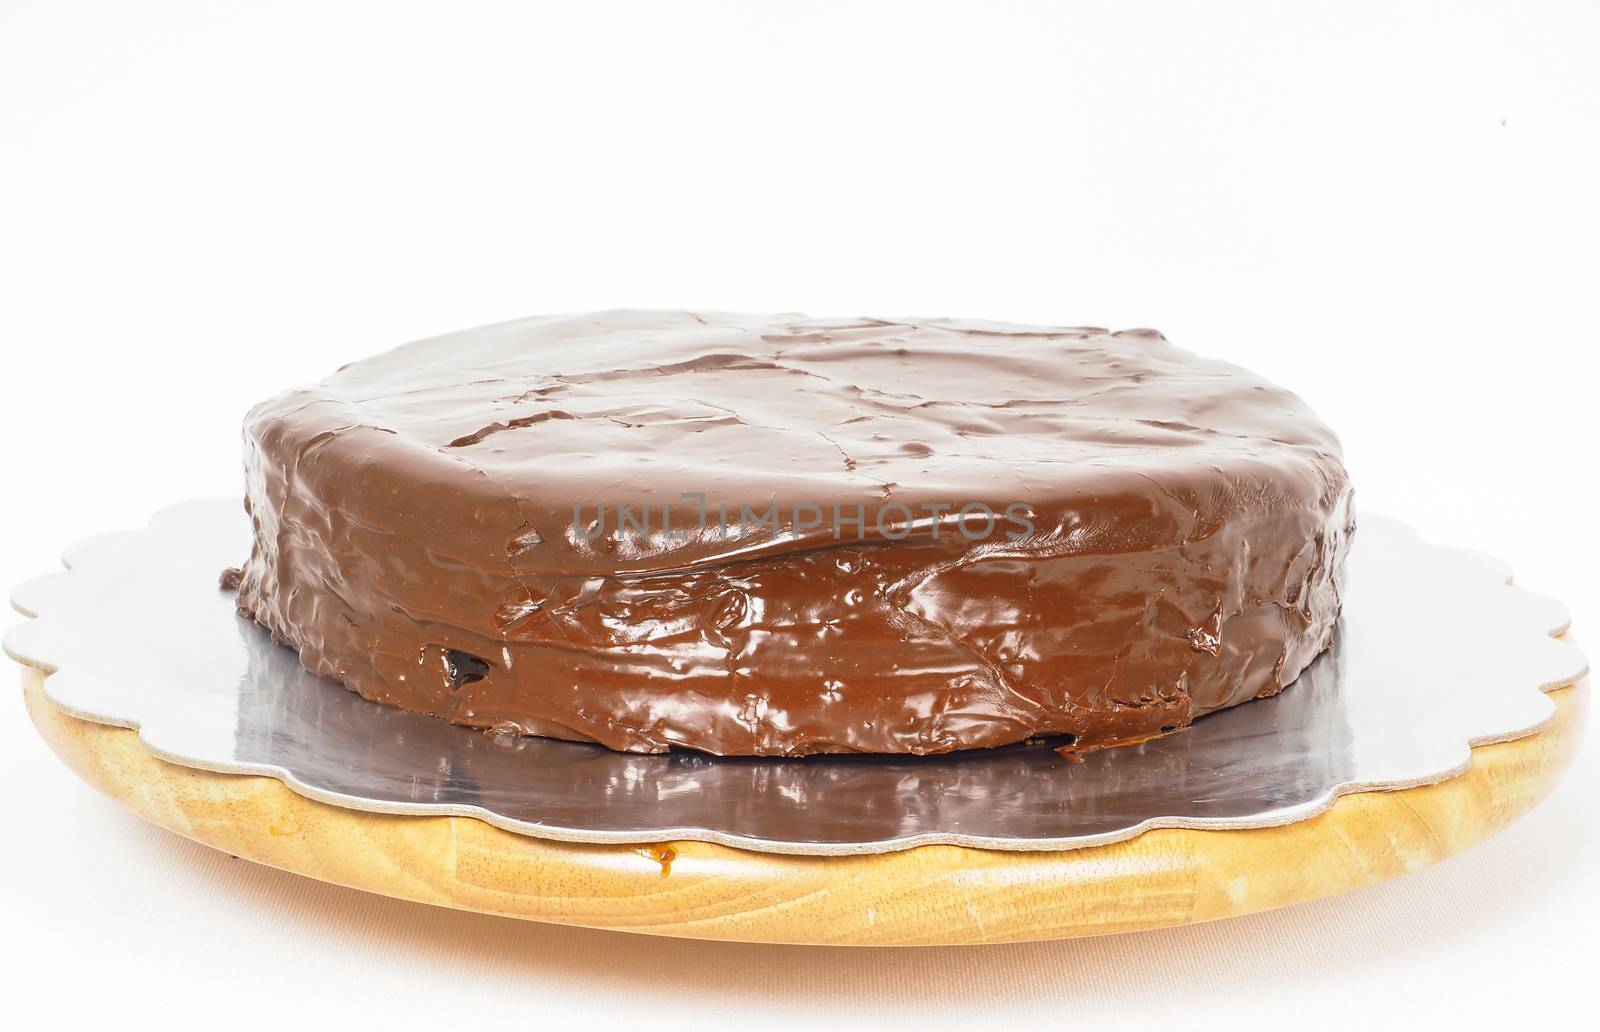 Sacher chocolate cake on a silver plate on wooden board towards  by Arvebettum